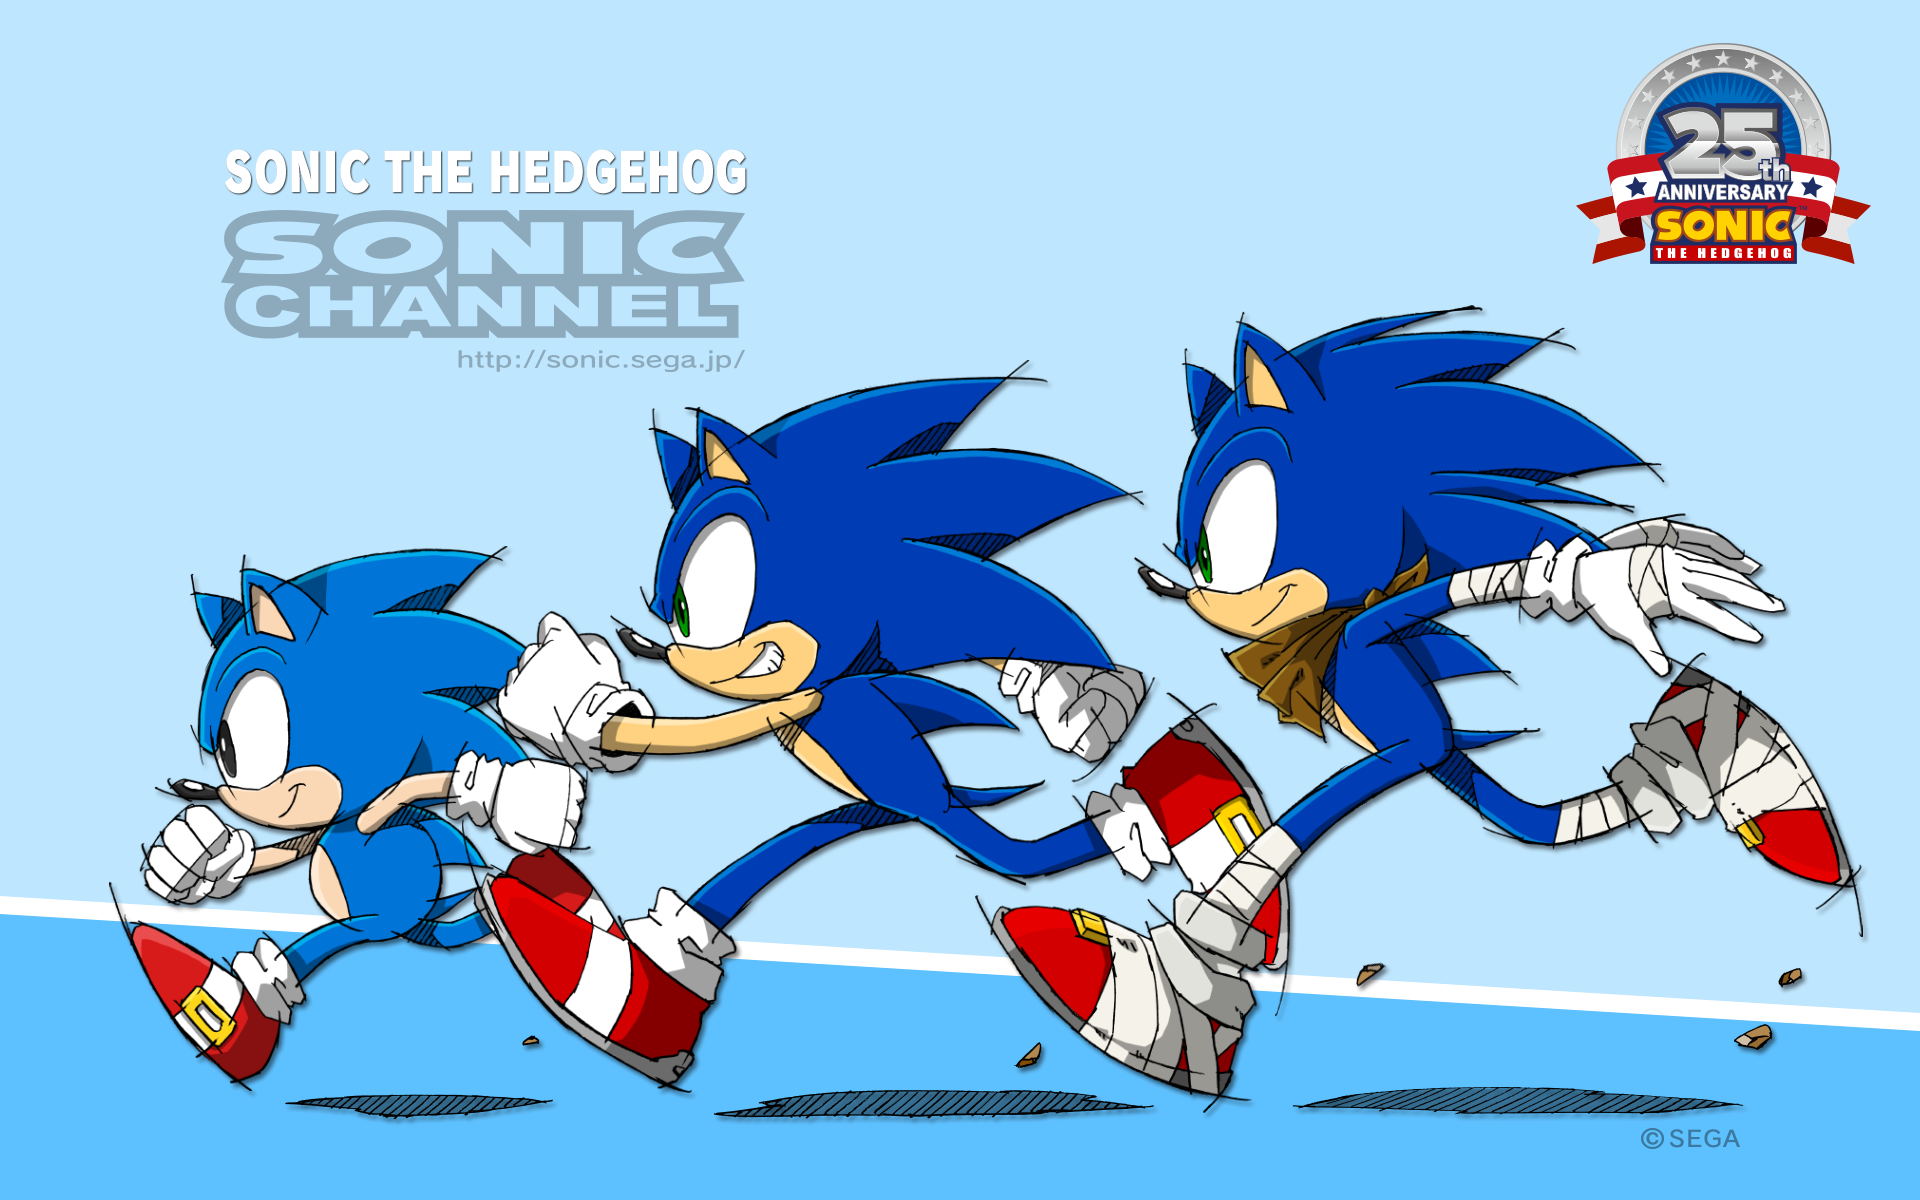 Classic Sonic Wallpaper Free Classic Sonic Background